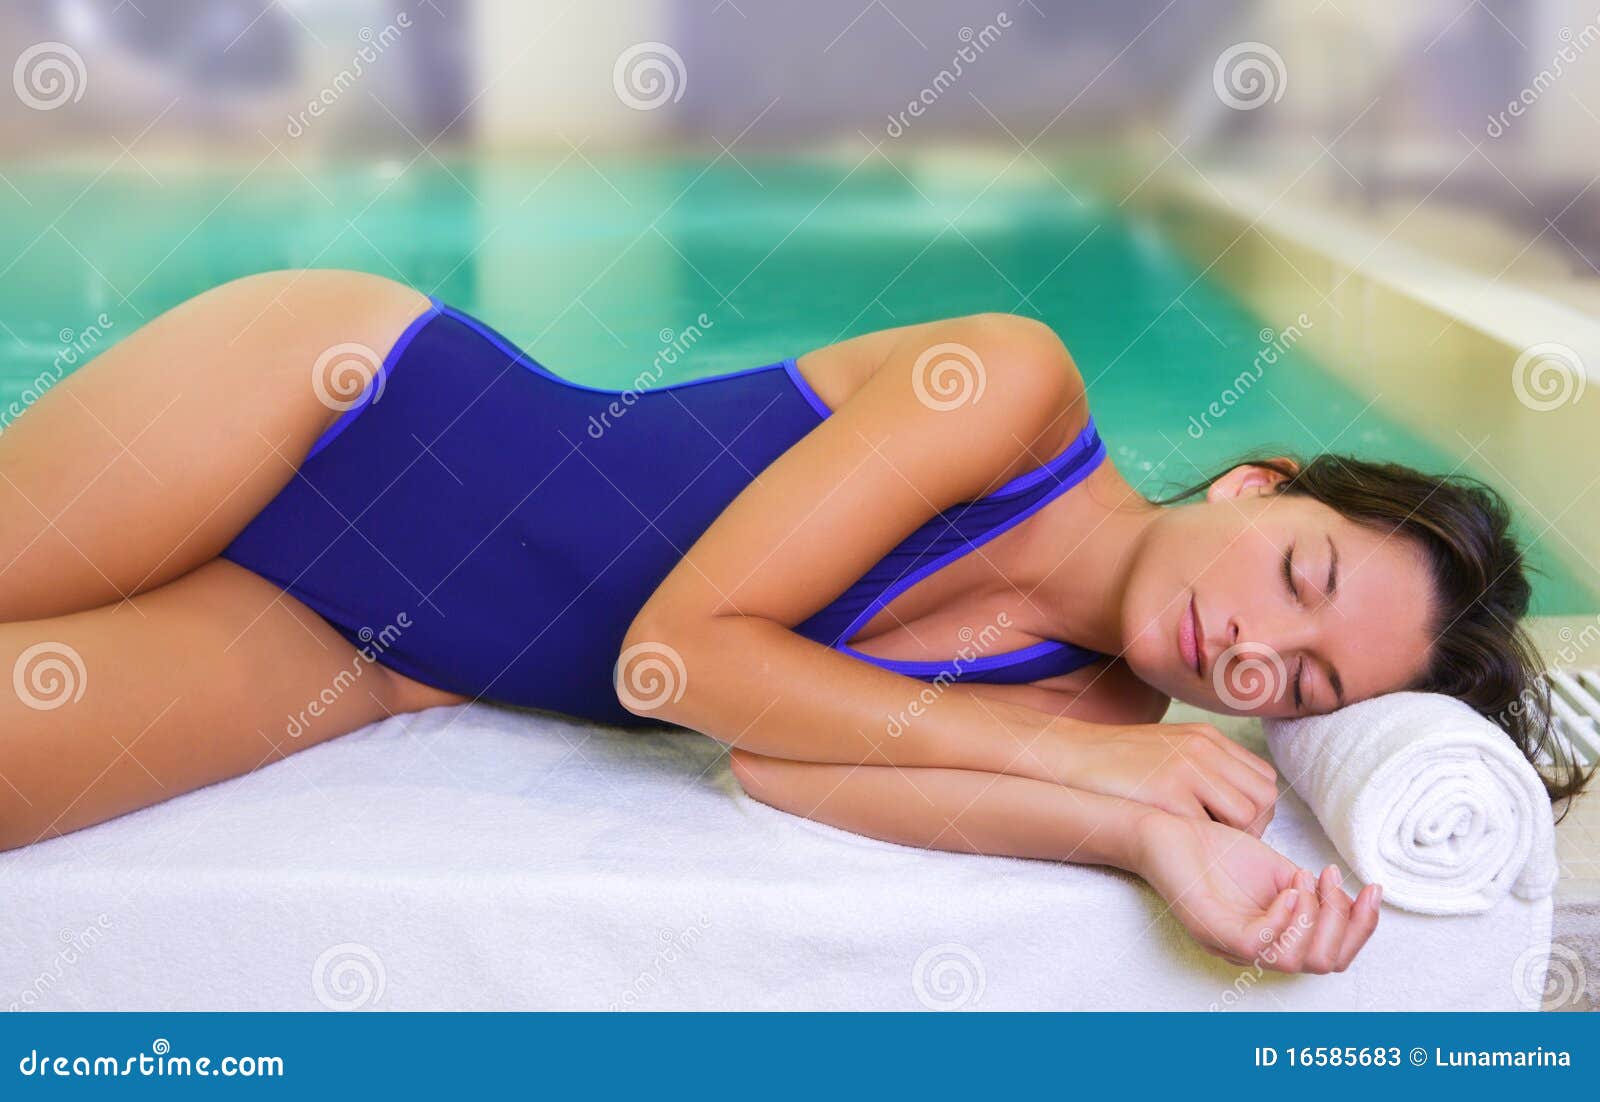 bathing suit spa woman relaxed turquoise pool